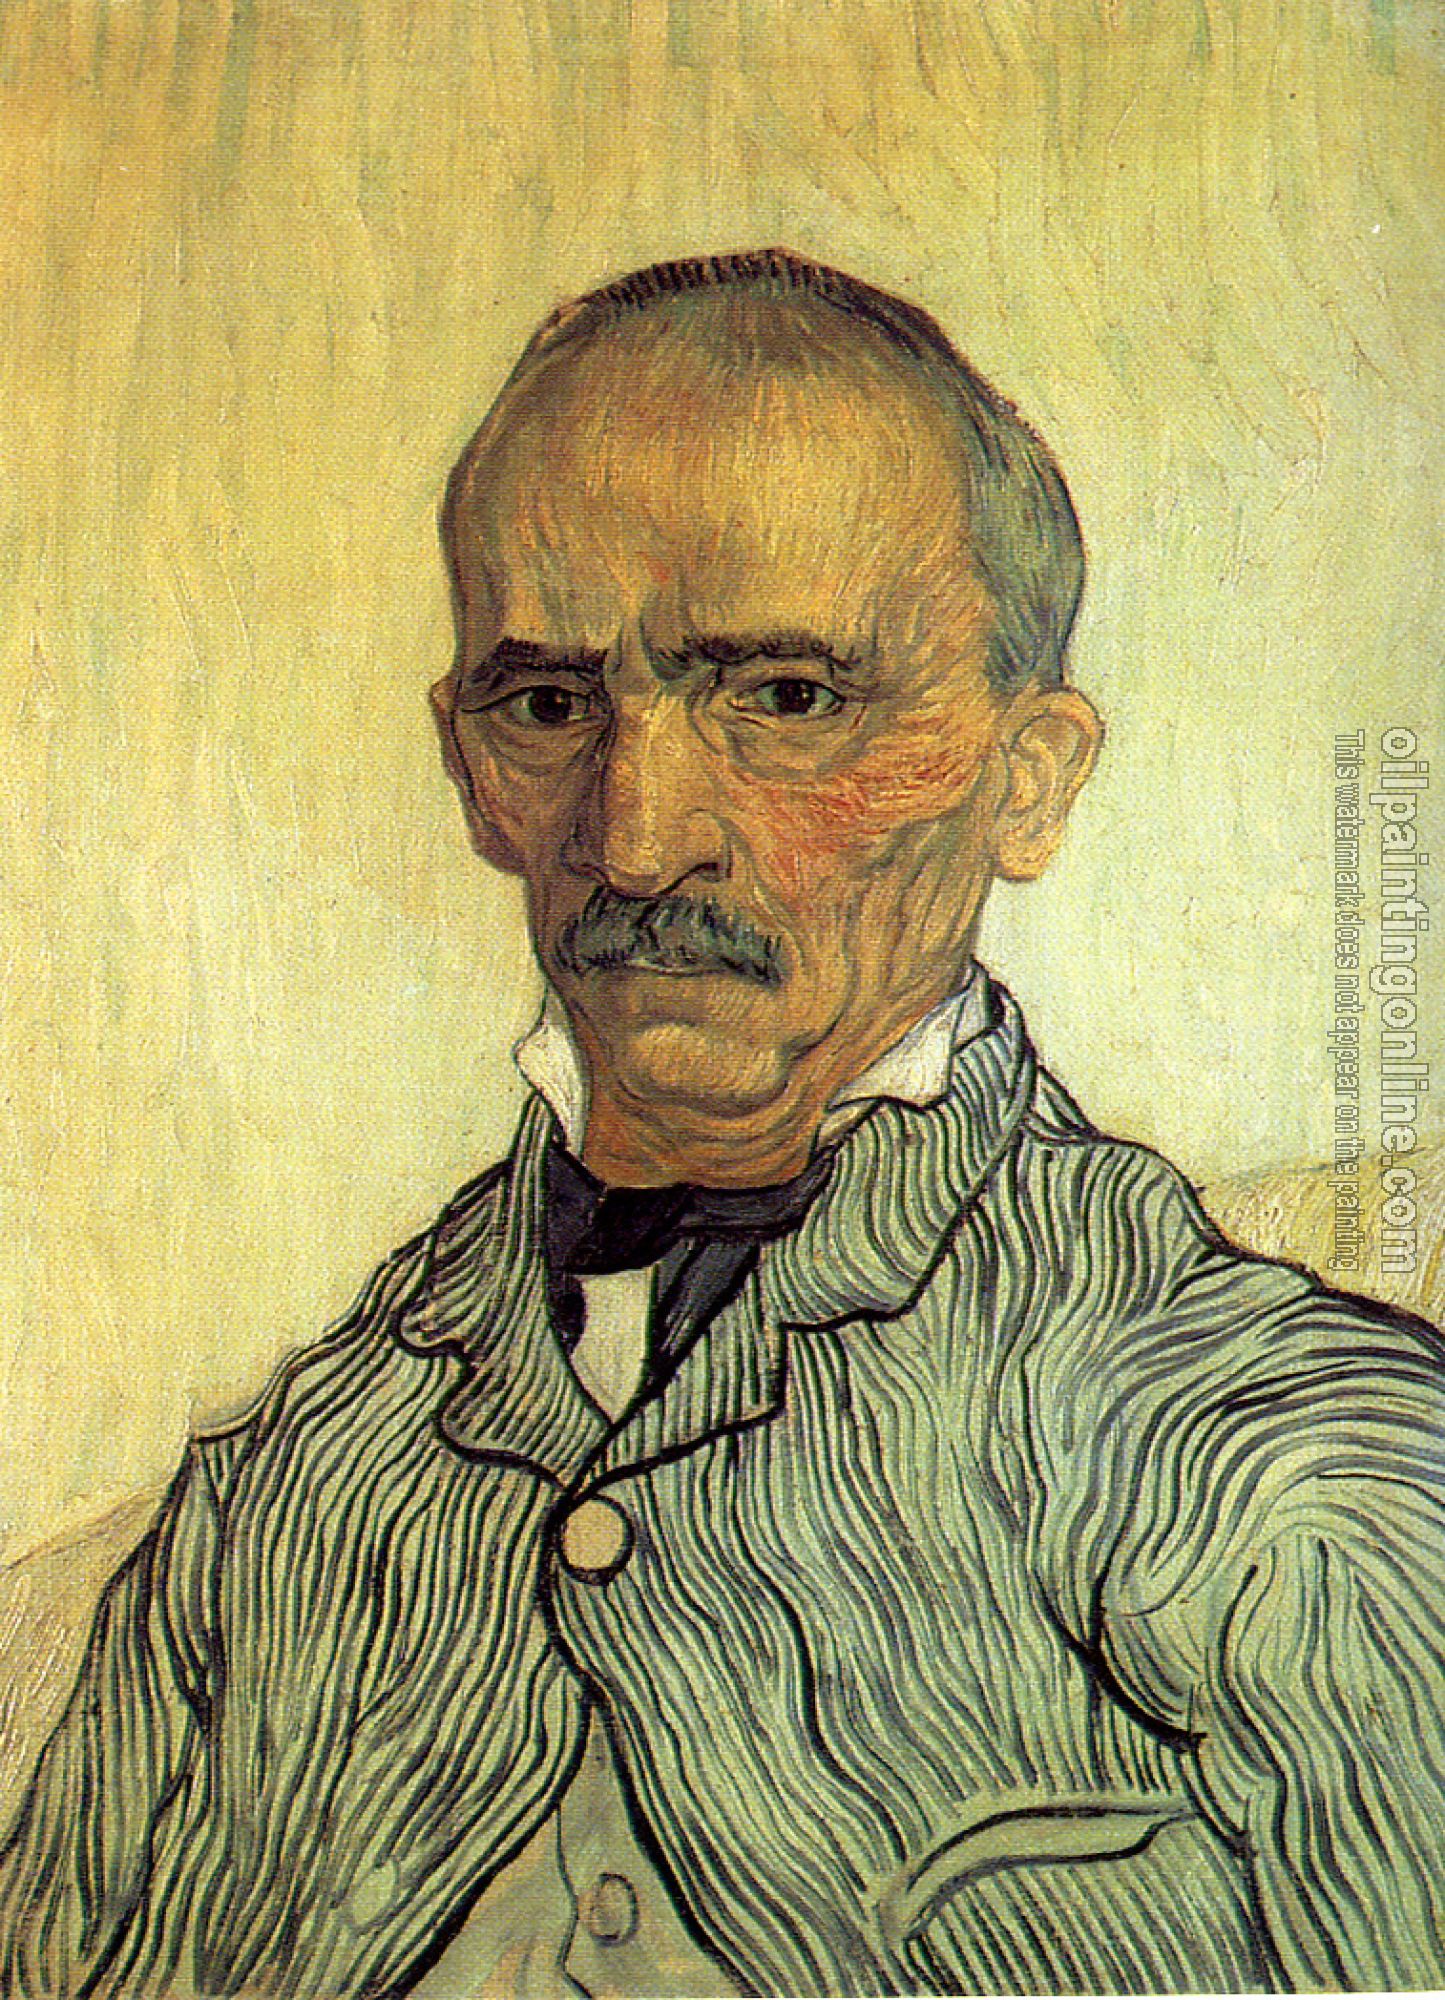 Gogh, Vincent van - Portrait of the Chief Orderly(Trabuc)